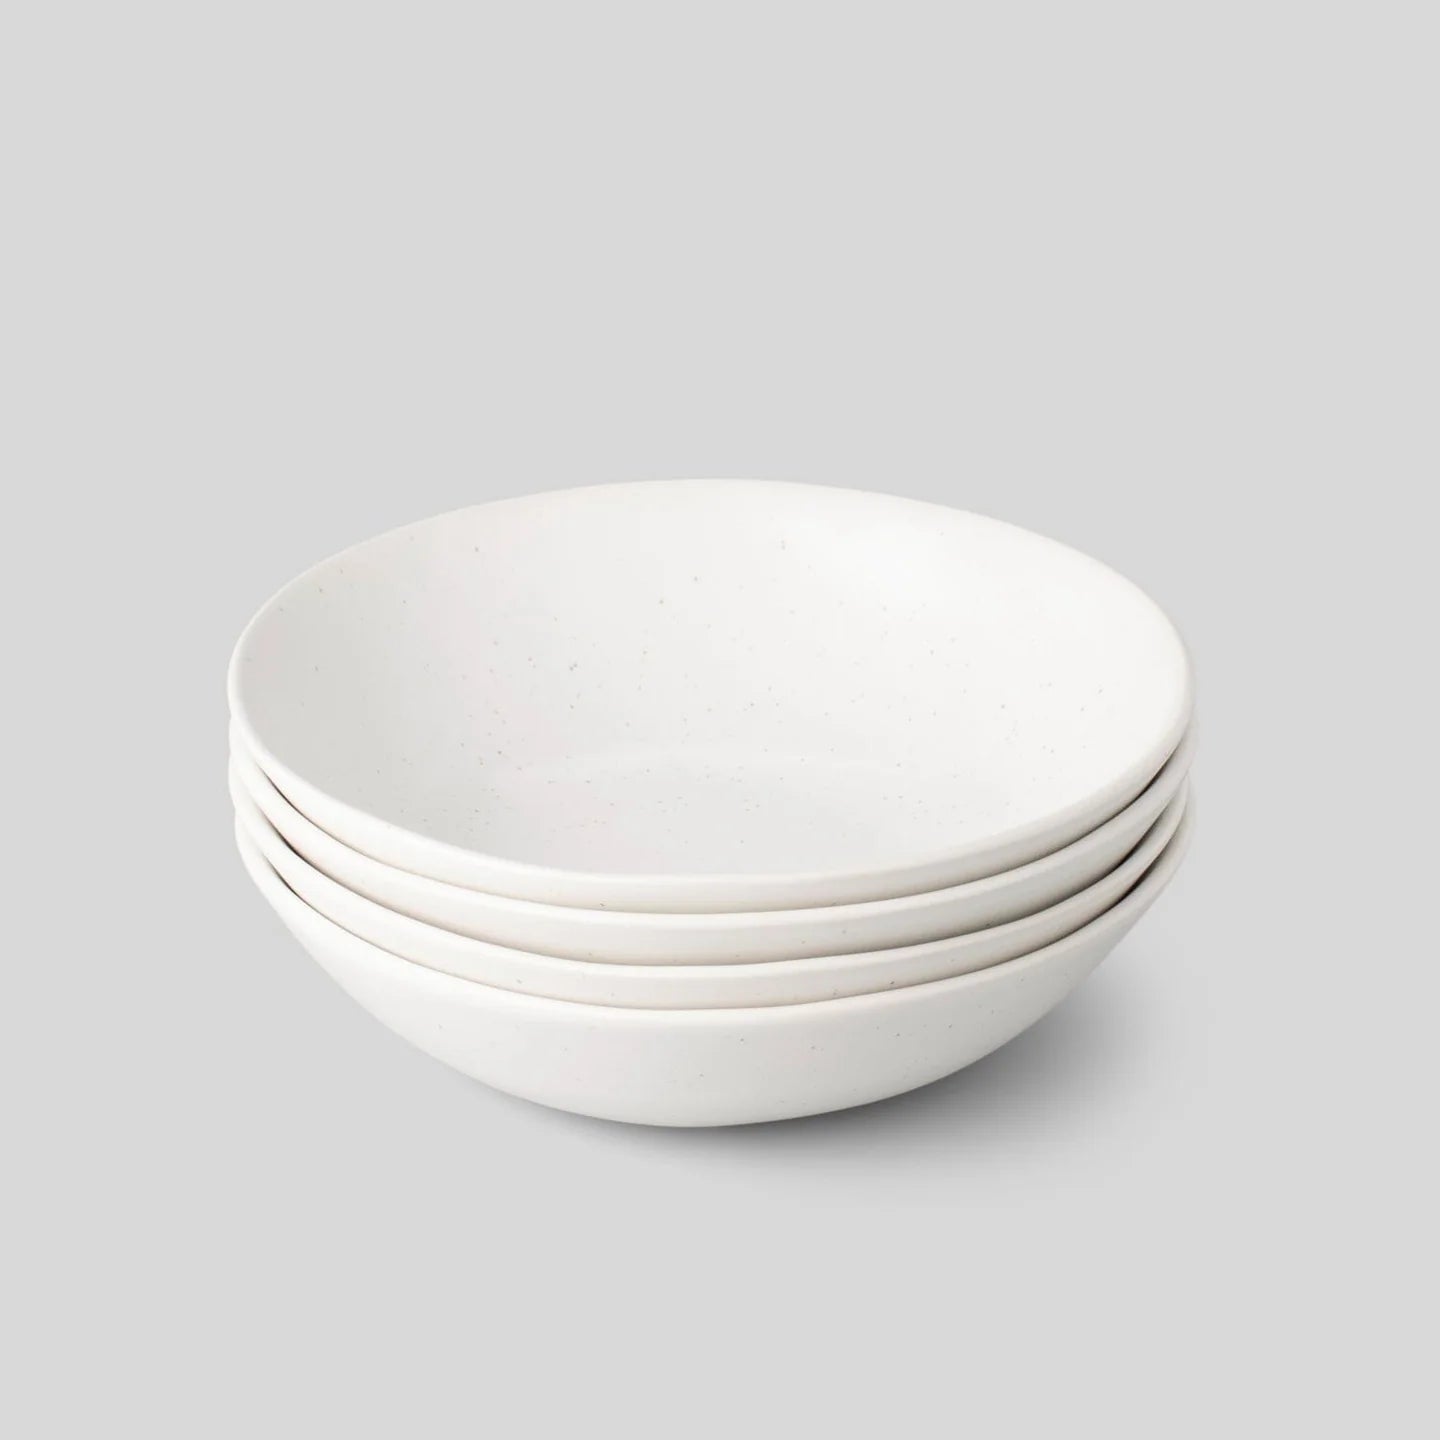 The Pasta Bowls (4) - Speckled White